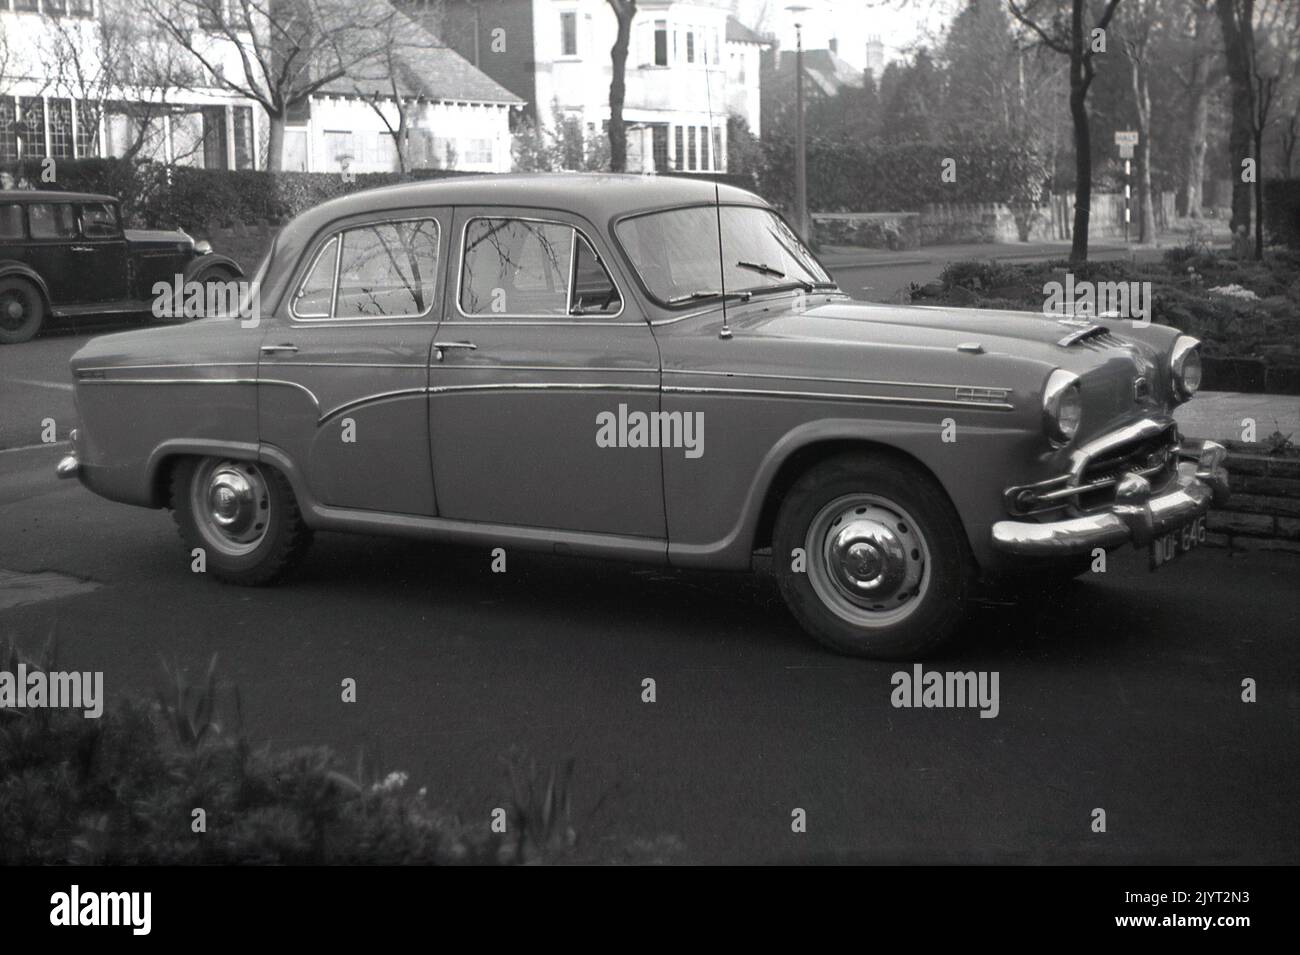 1950s, historical, a motorcar of the era, an Austin Cambridge, an A55, parked on a driveway, off a suburban street, England, UK. A pre-war car is parked in the street behind. The Austin Cambridge was produced in Cowley, Oxford, England, over several generations and in different models, from 1954 to 1971, Stock Photo